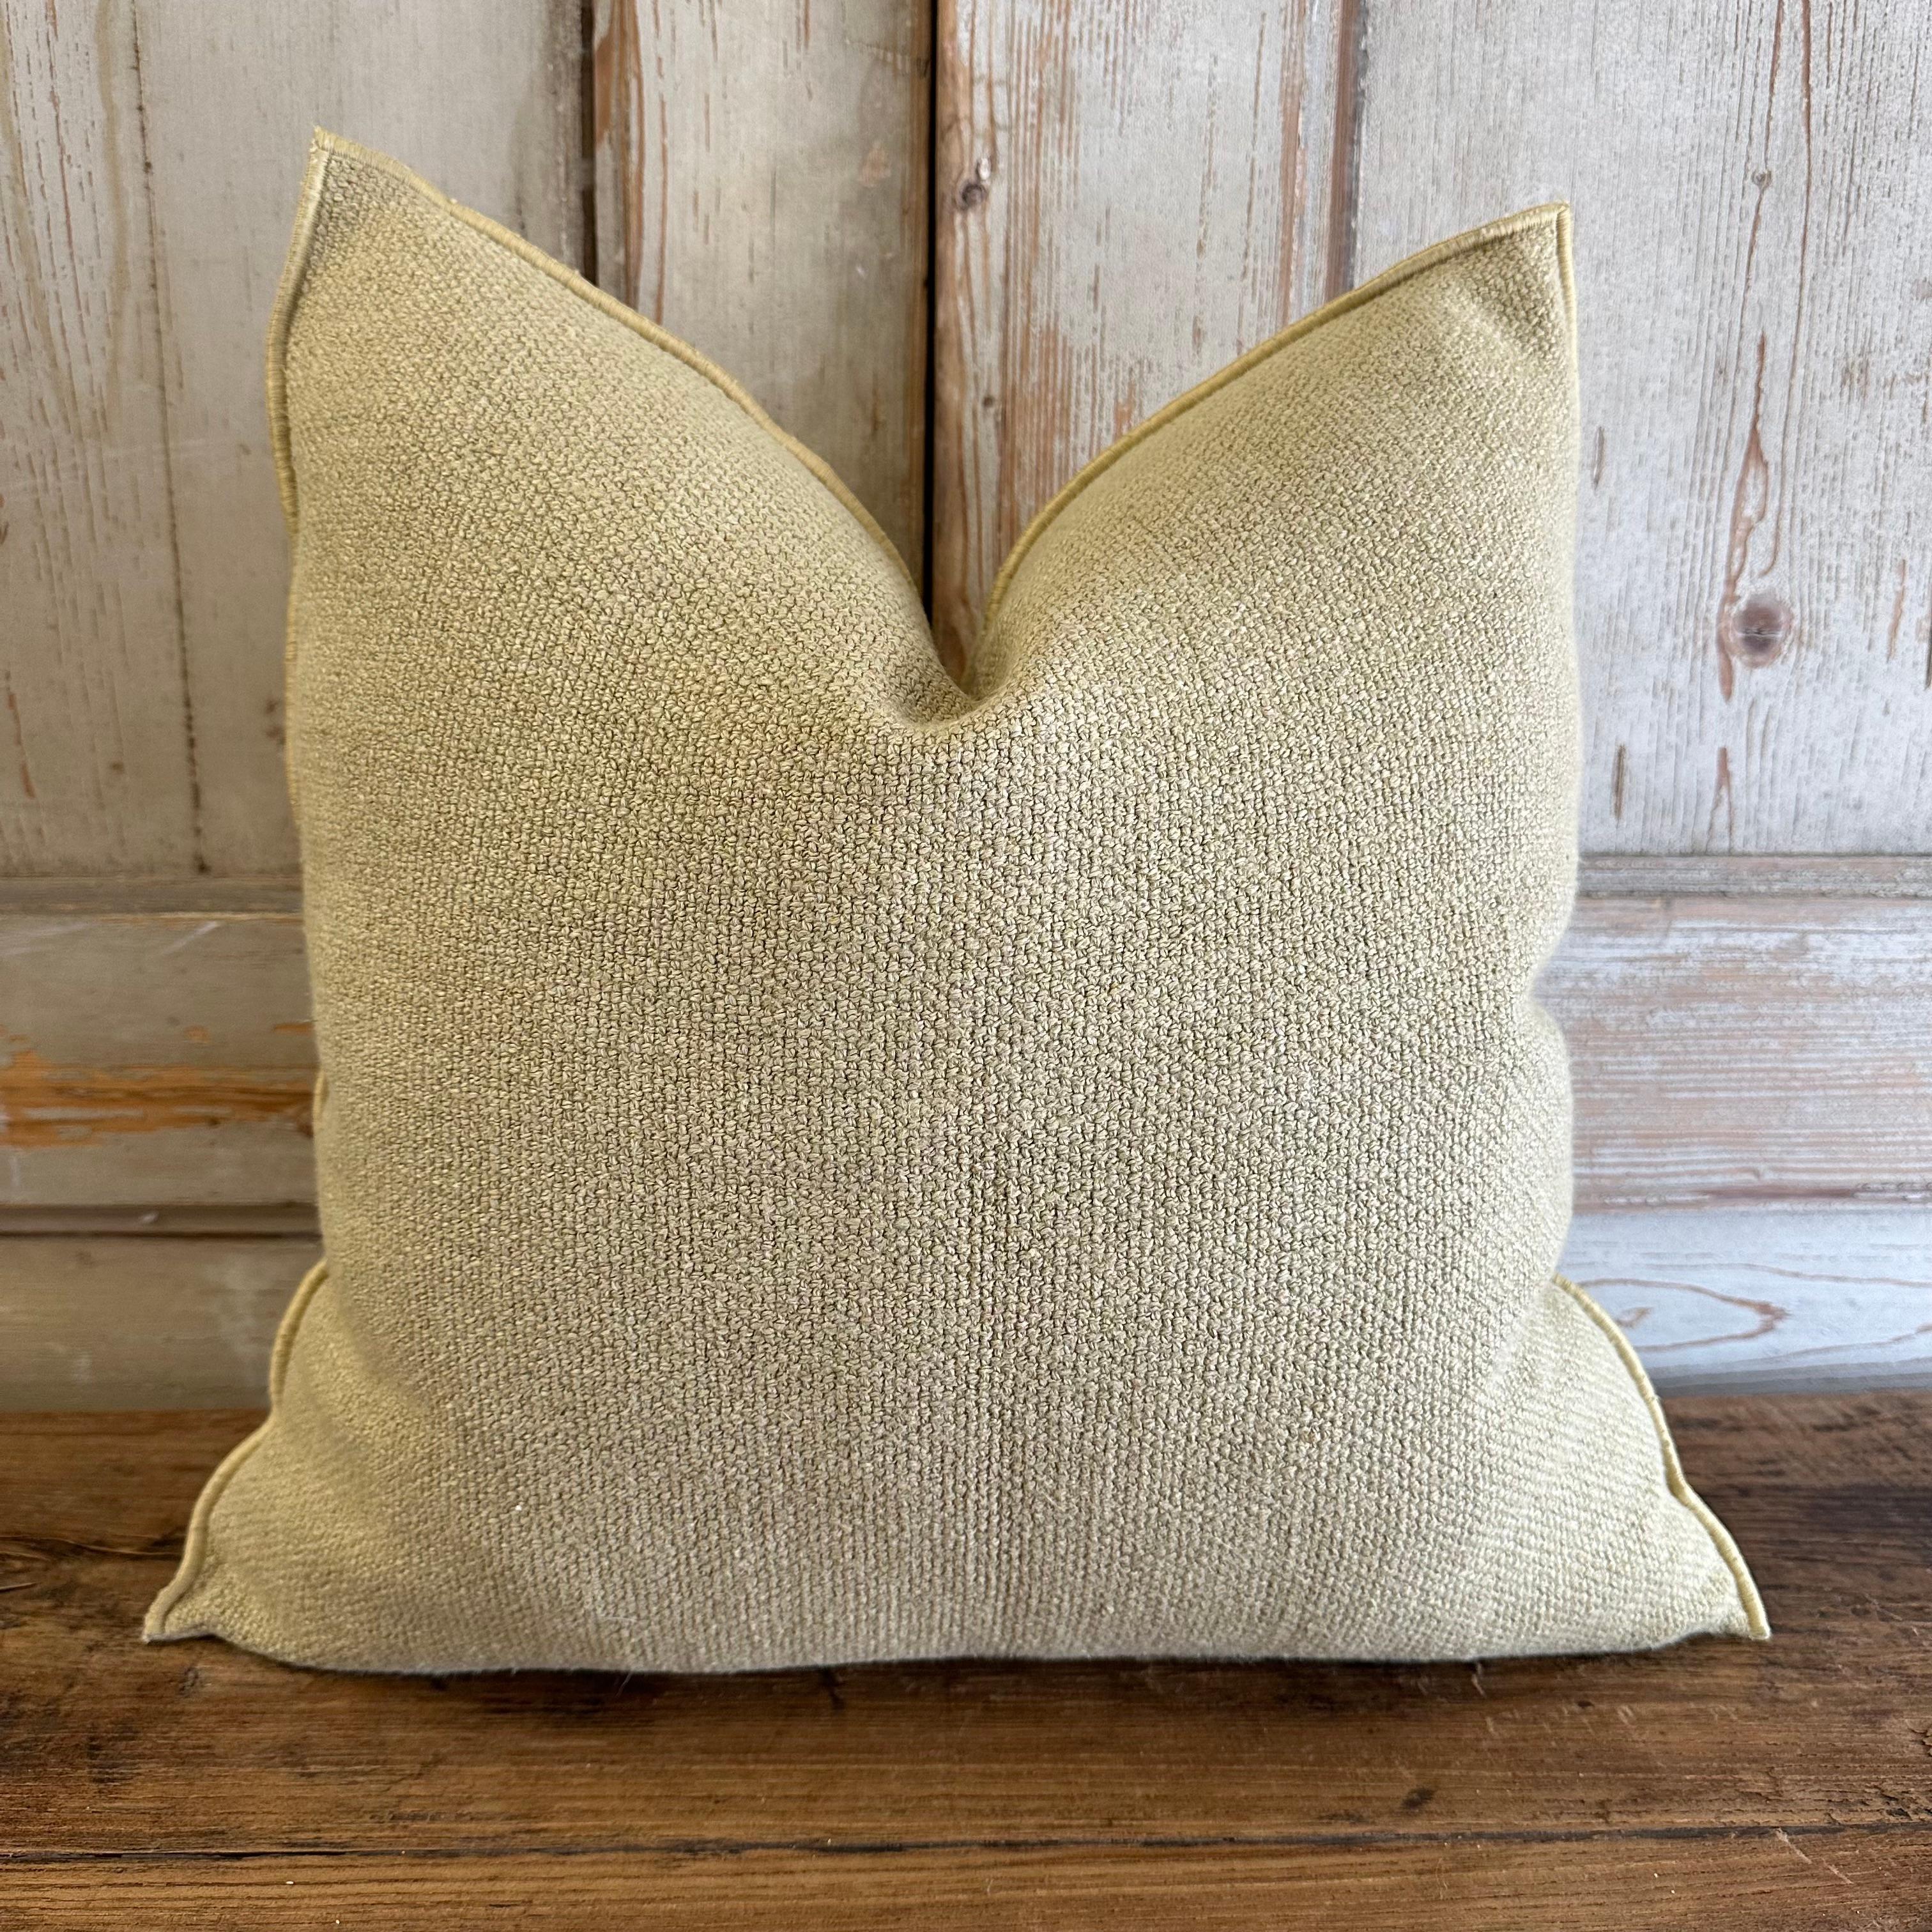 Gold mustard colored linen blend accent pillow. Beautiful nubby soft texture with decorative edge.
Size: 20 x 20
Down insert included
Metal zipper closure
Color: Paille.